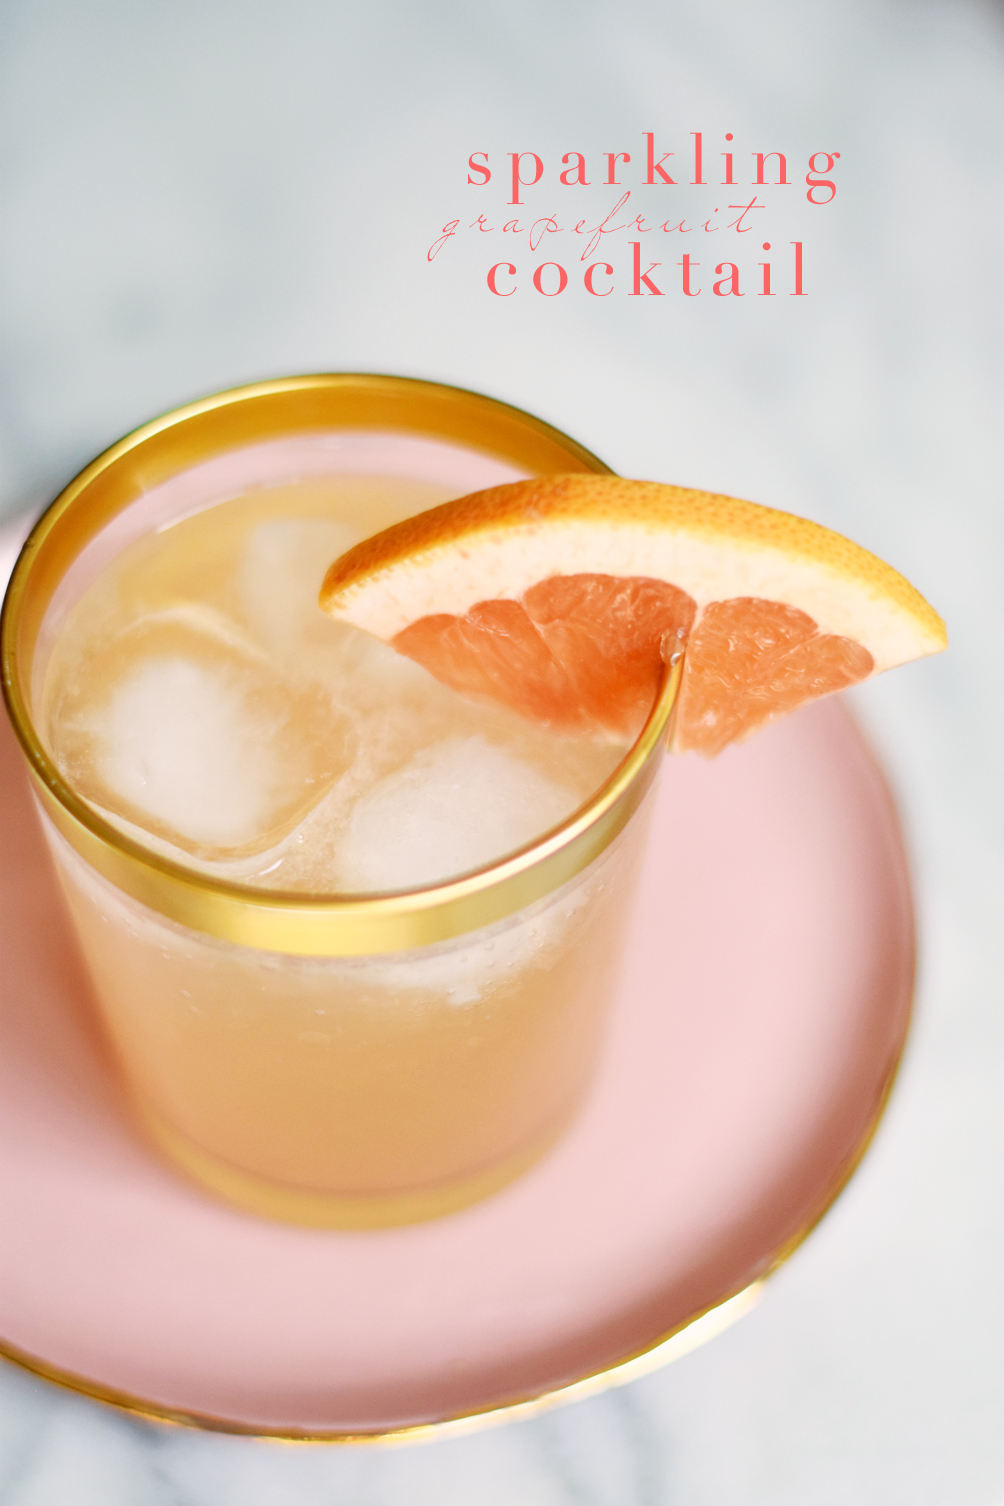 Leslie Musser of one brass fox mixes up the perfect summer drink with this sparkling grapefruit cocktail